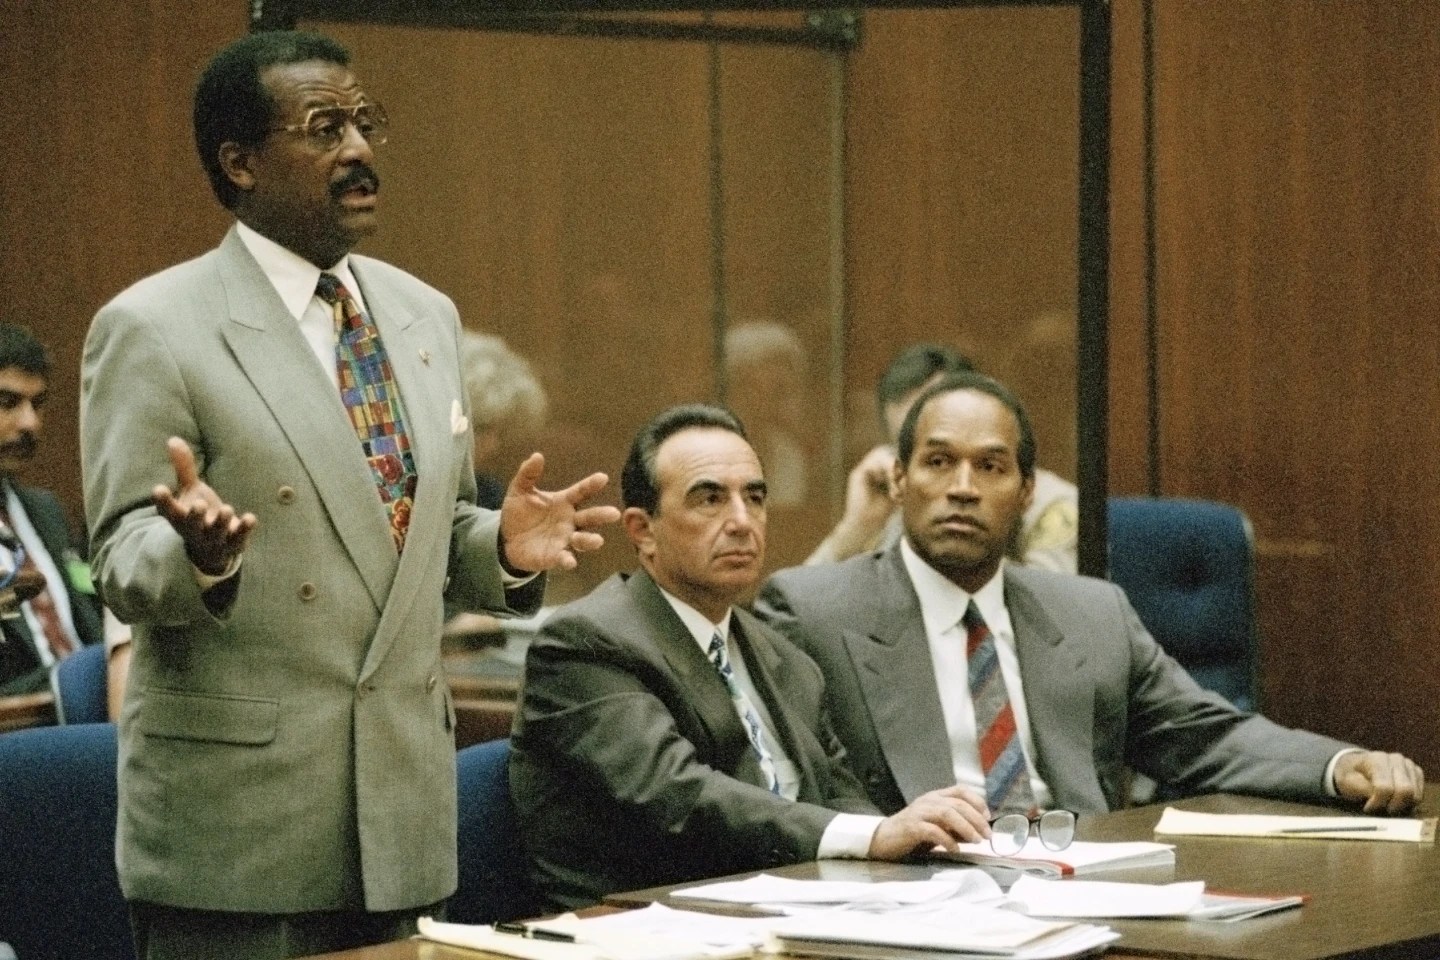 Learn more about O.J. Simpson: The TV, movies, books and podcasts about the trial of the century